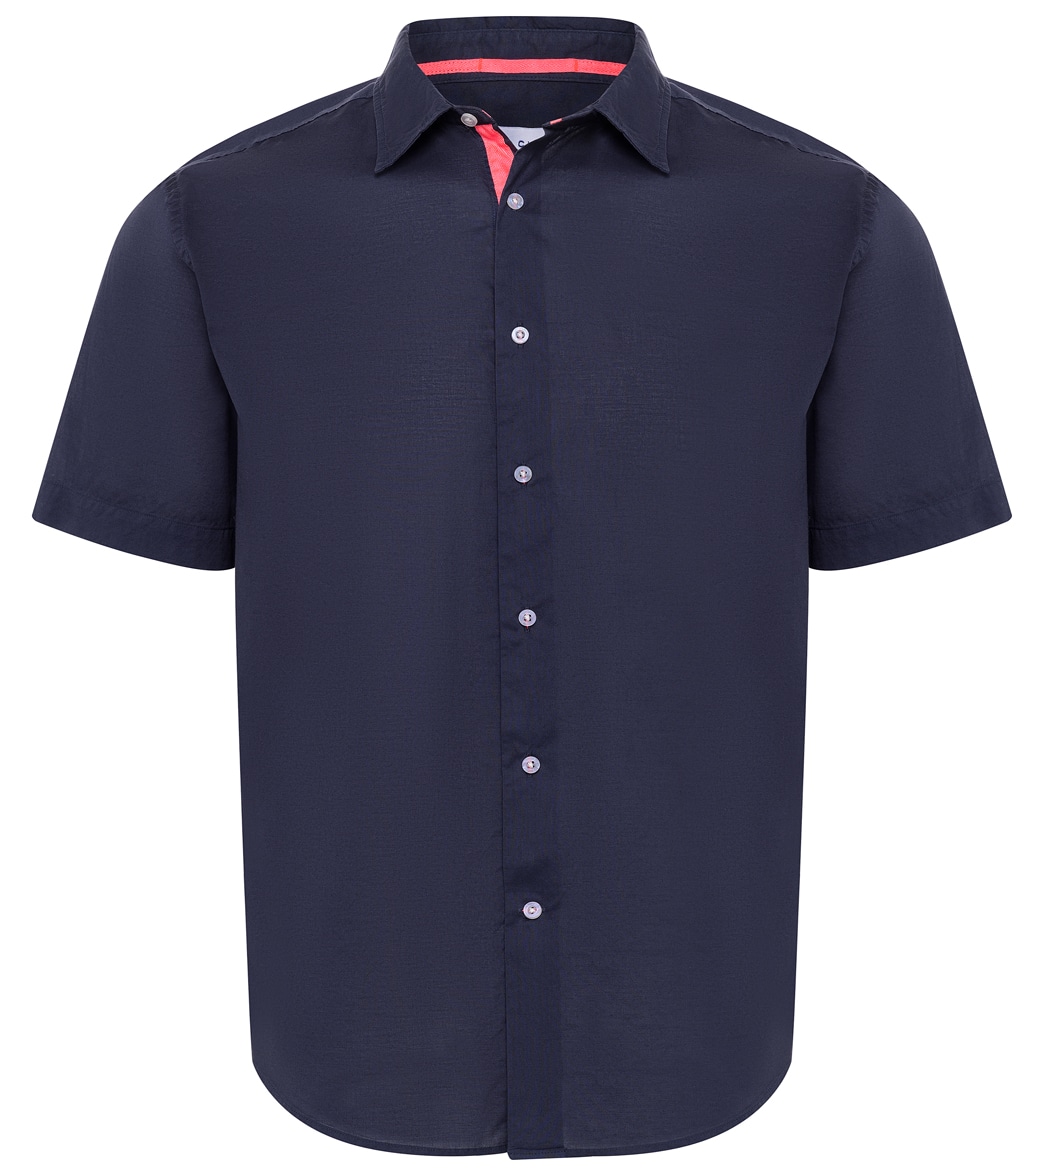 Le Club Men's Maxwell Short Sleeve Shirt - Navy Large Cotton/Polyester - Swimoutlet.com